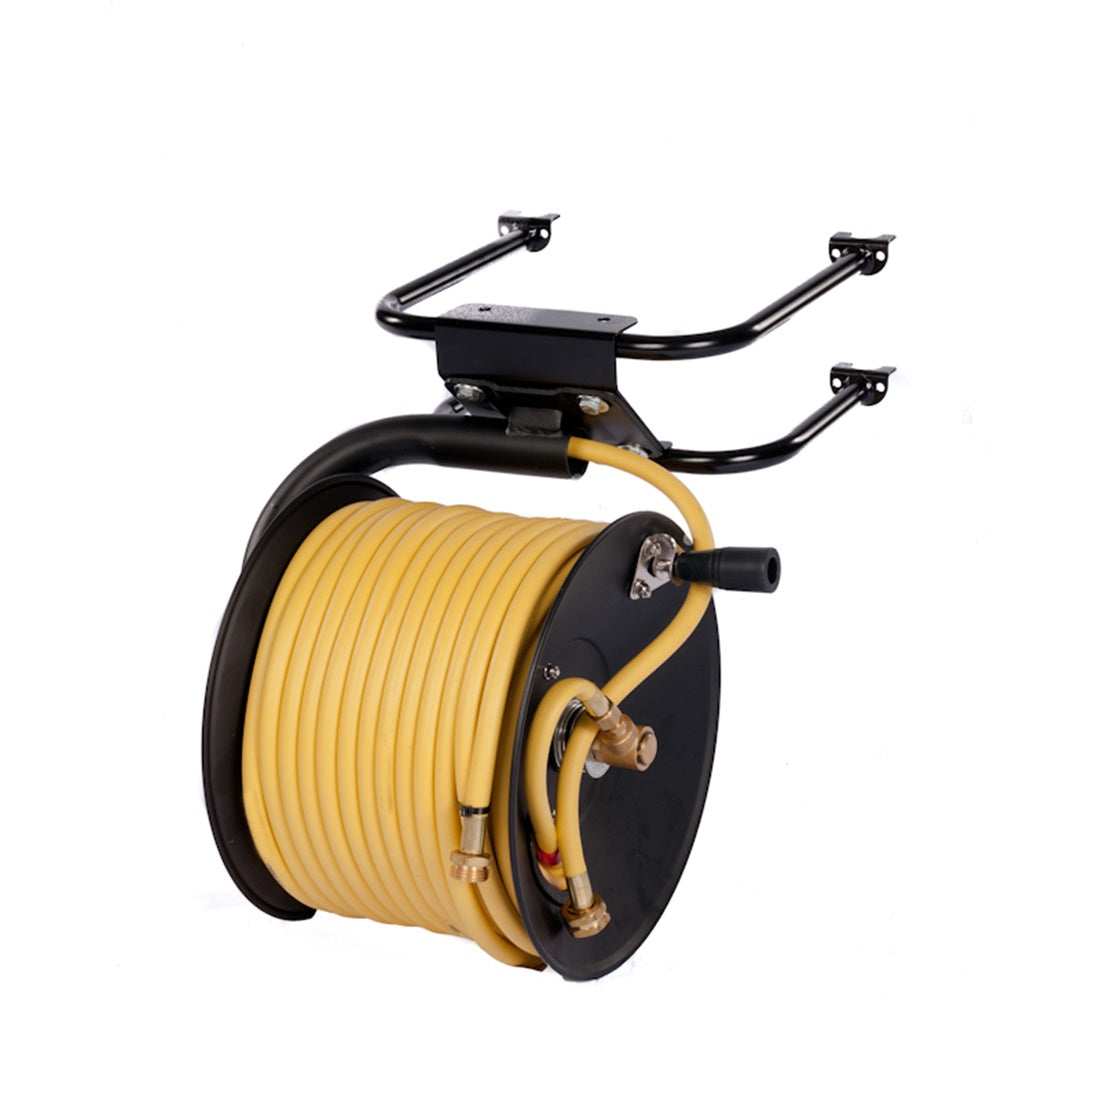 IPC Eagle Low Pressure Garden Hose Reel - Main Product View